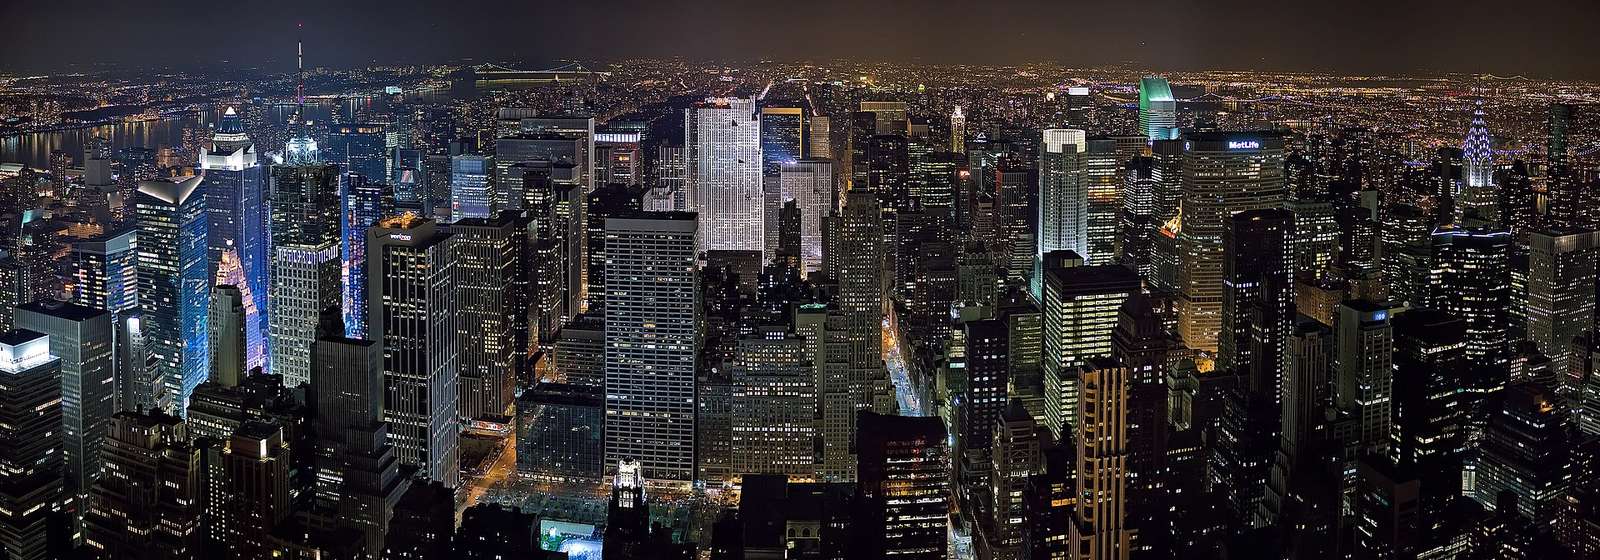 New York di notte puzzle online